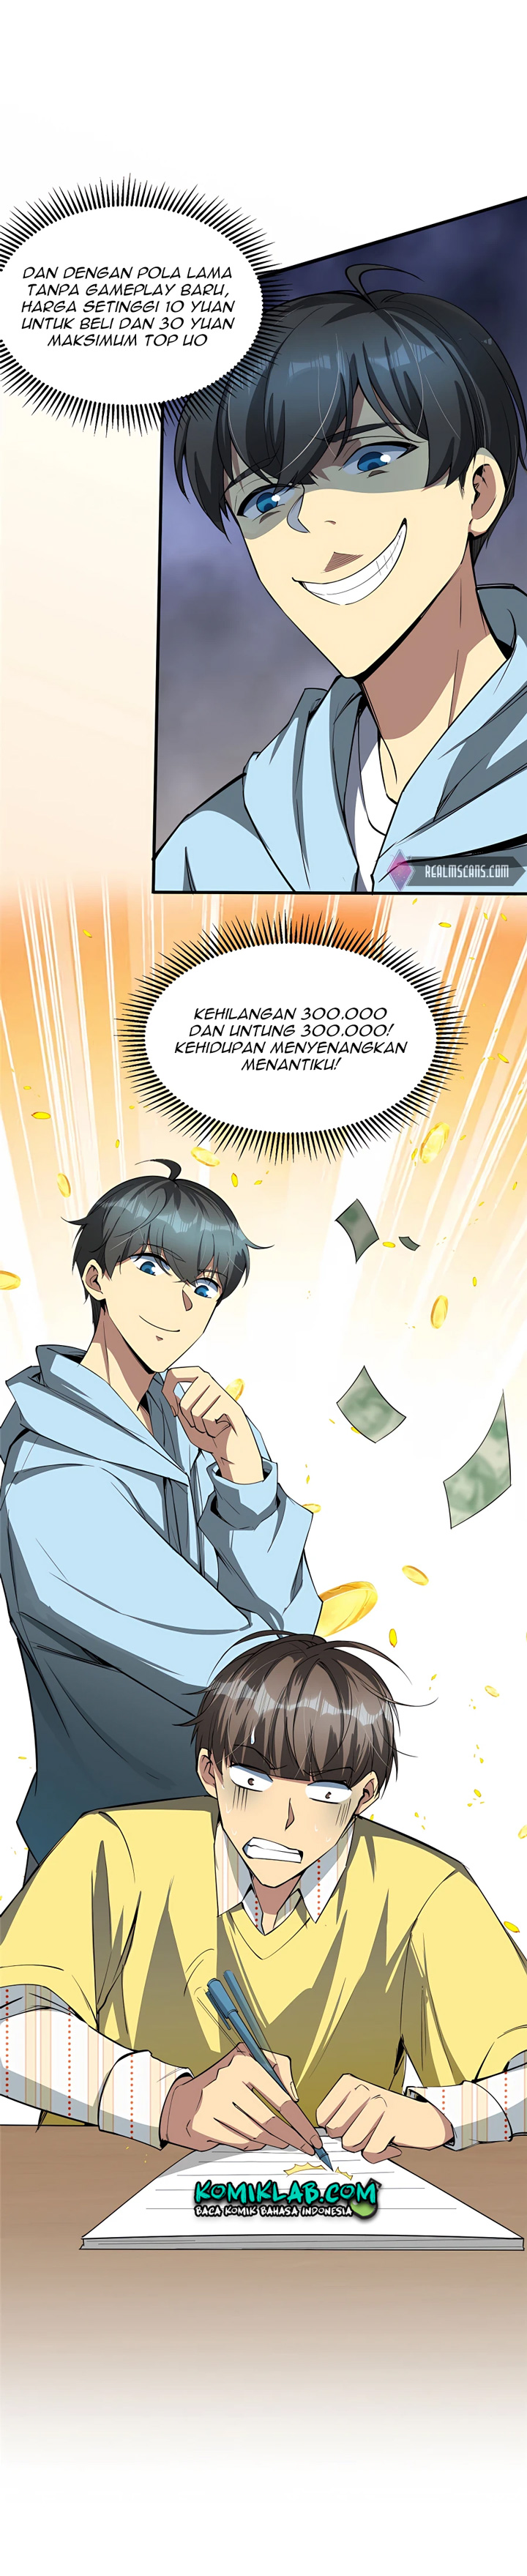 Losing Money To Be A Tycoon Chapter 05